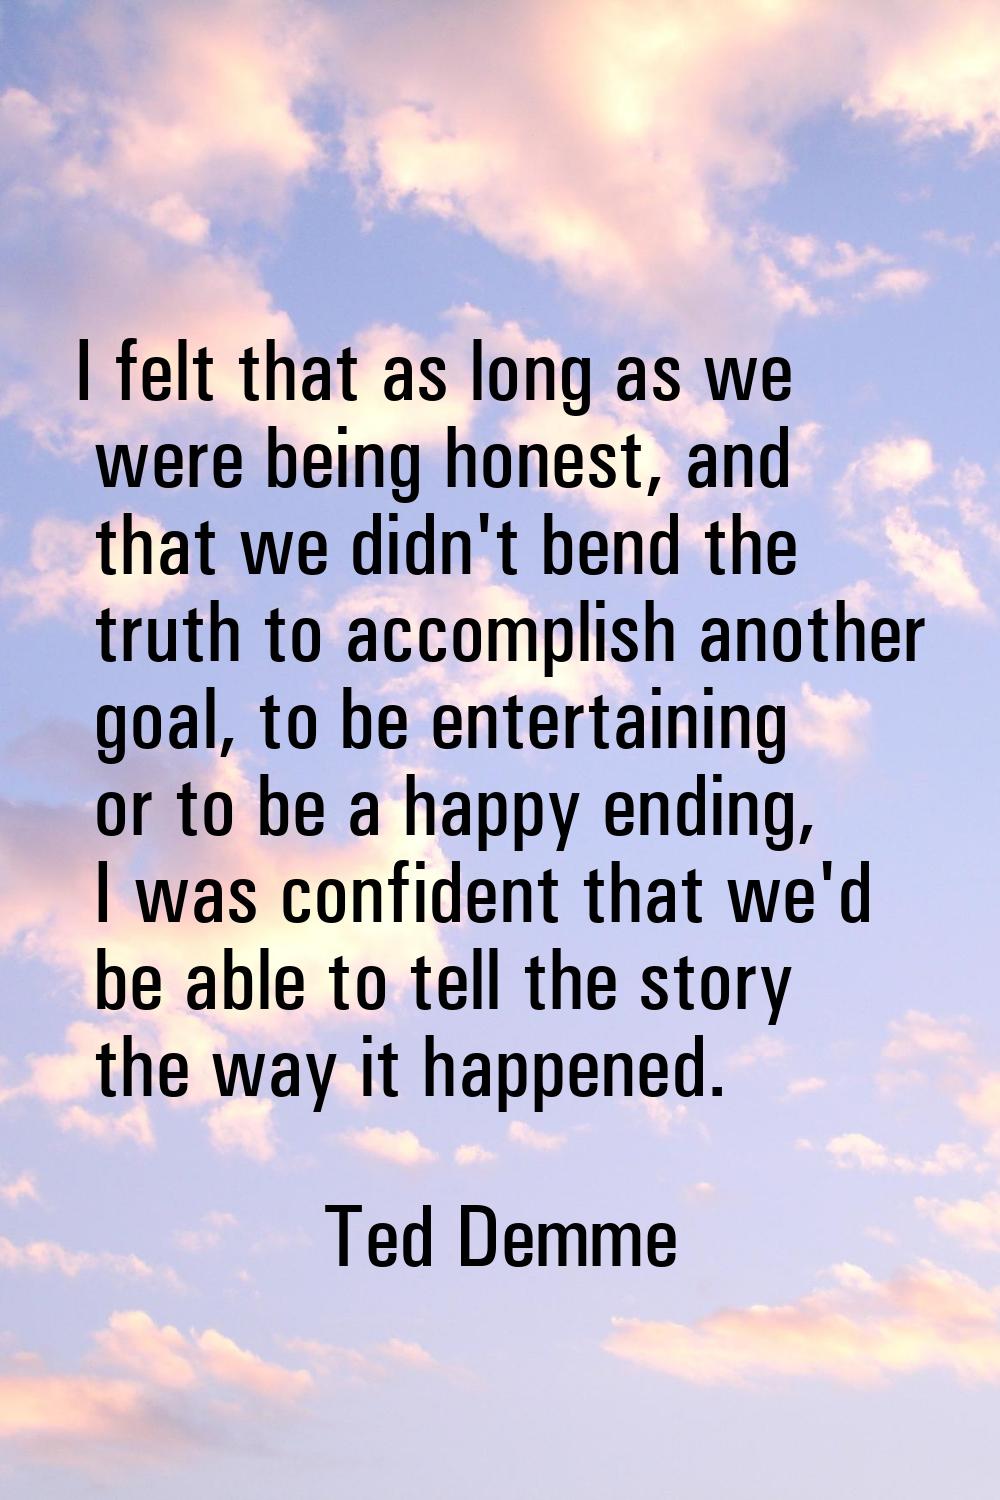 I felt that as long as we were being honest, and that we didn't bend the truth to accomplish anothe